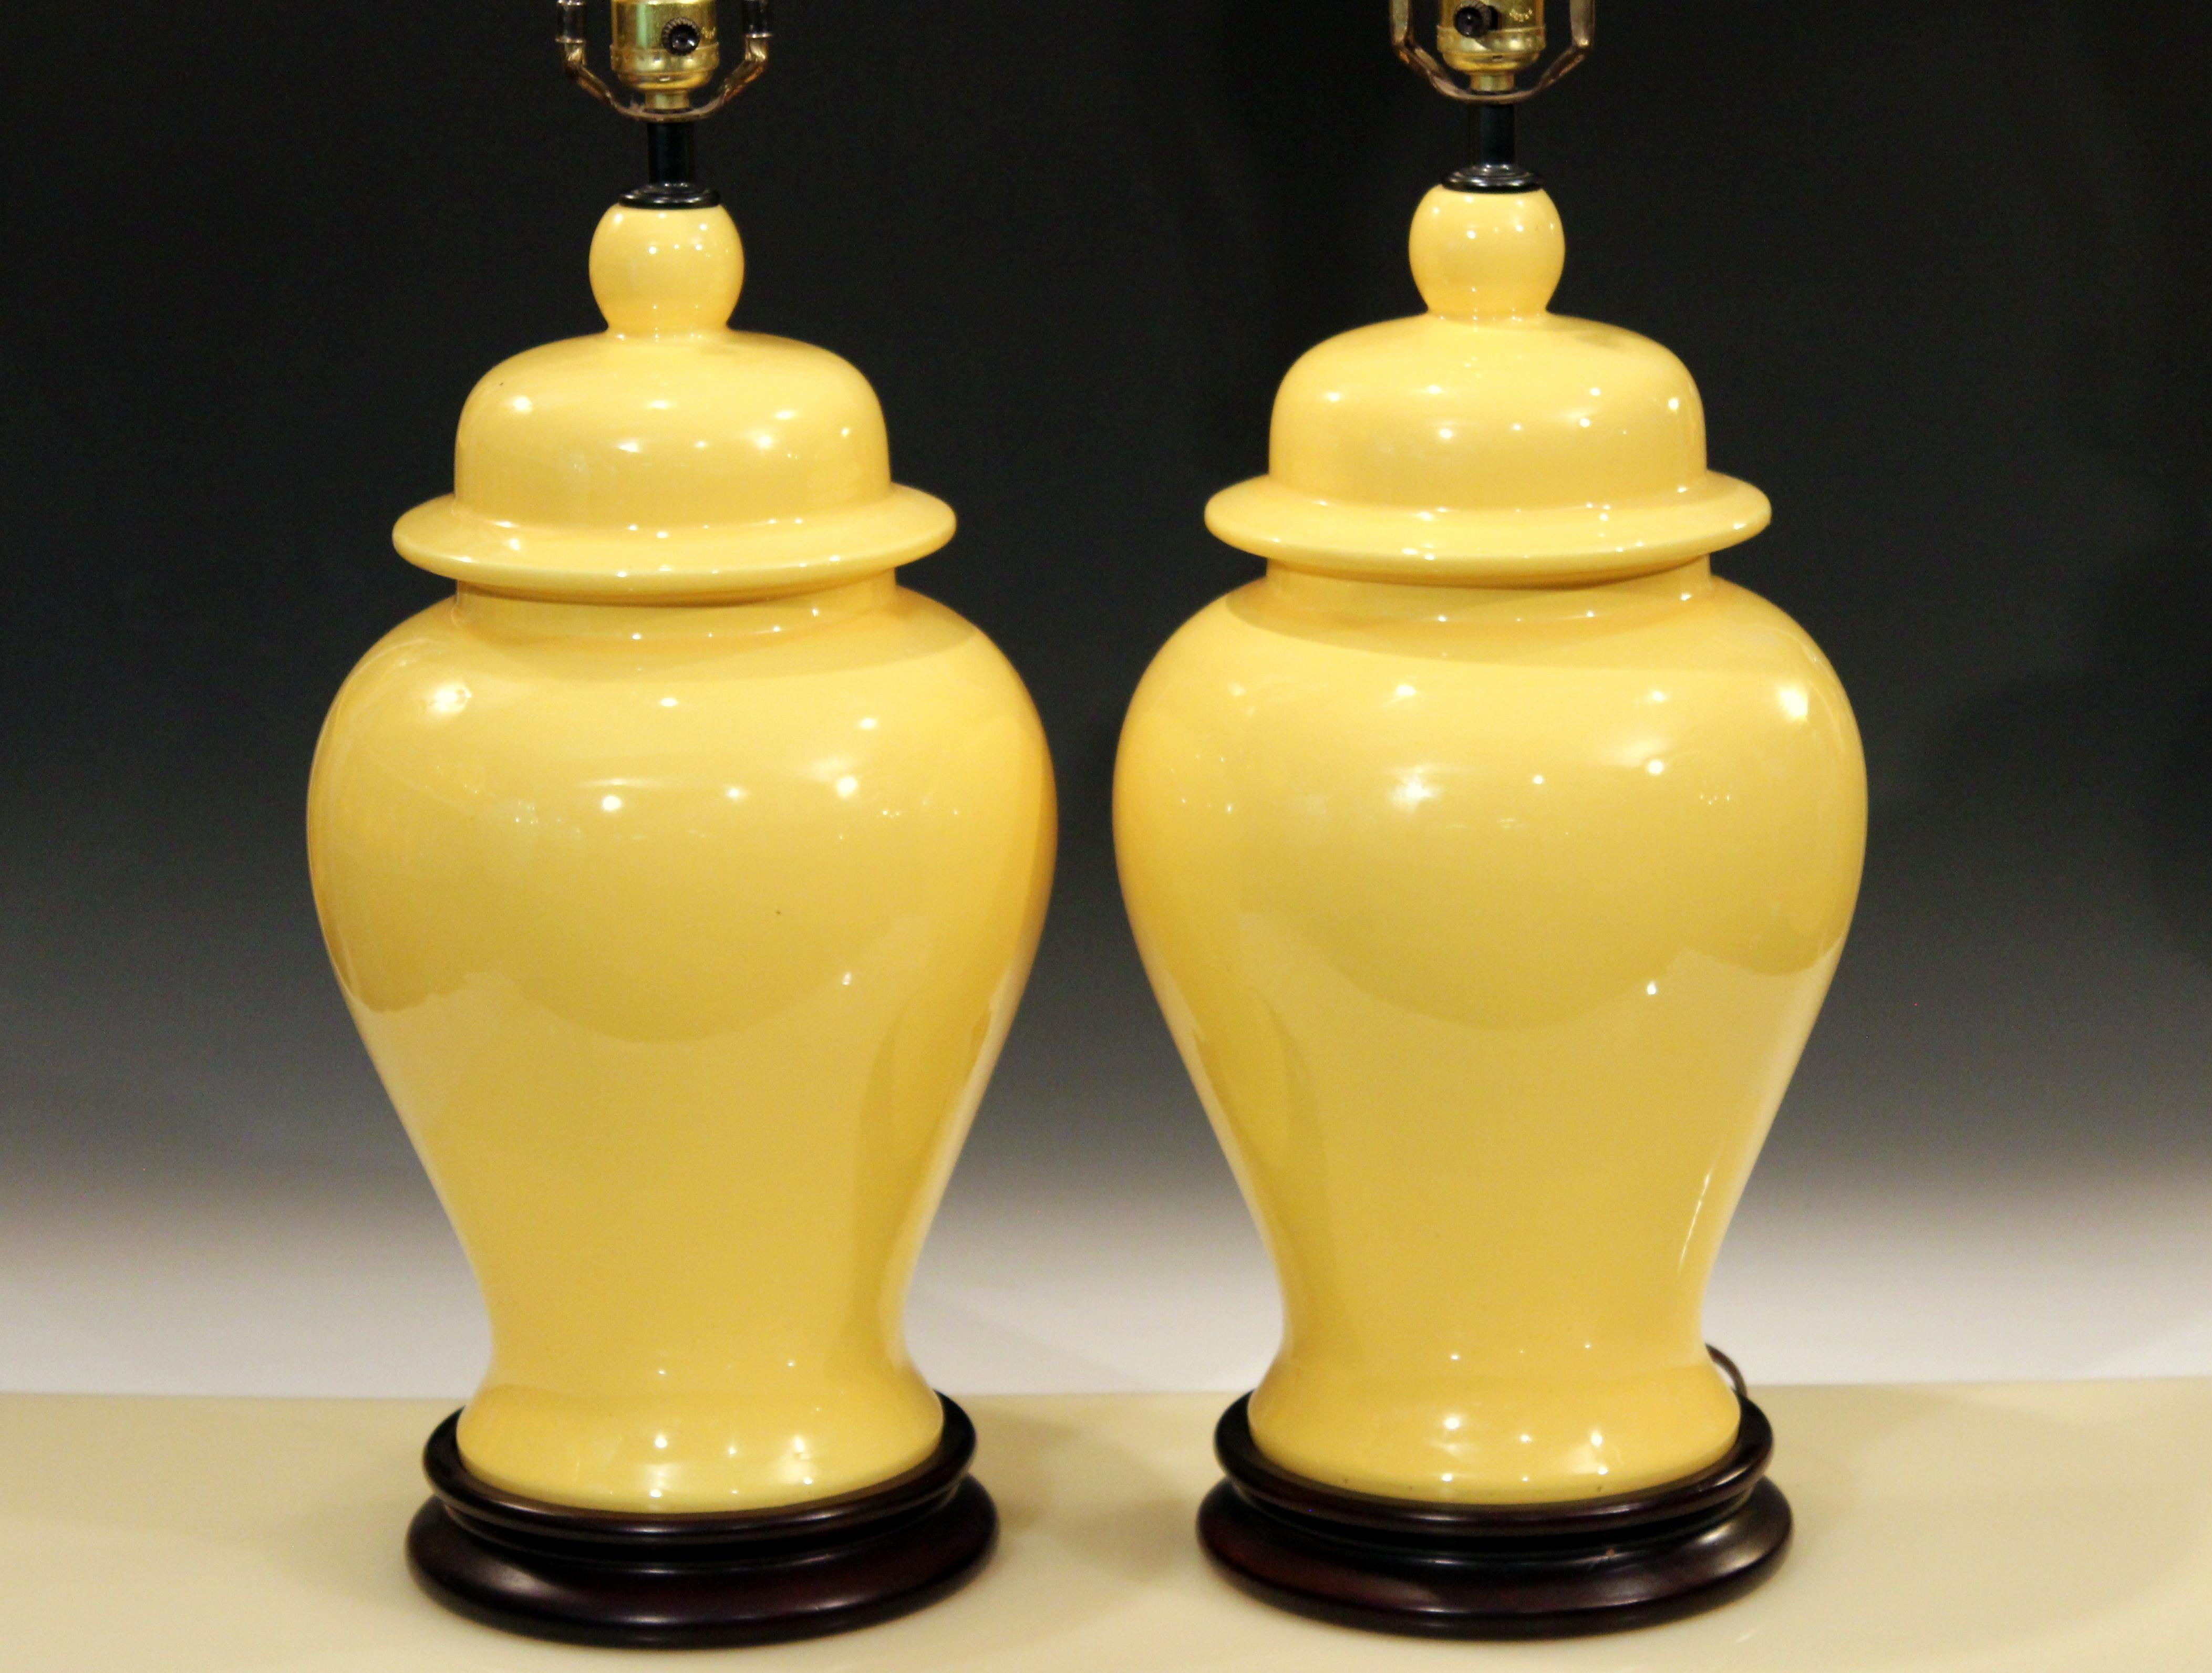 Large vintage pair of Haeger pottery lamps in bright sunny yellow glaze, circa 1970s. Three-way switch. Measures: 33